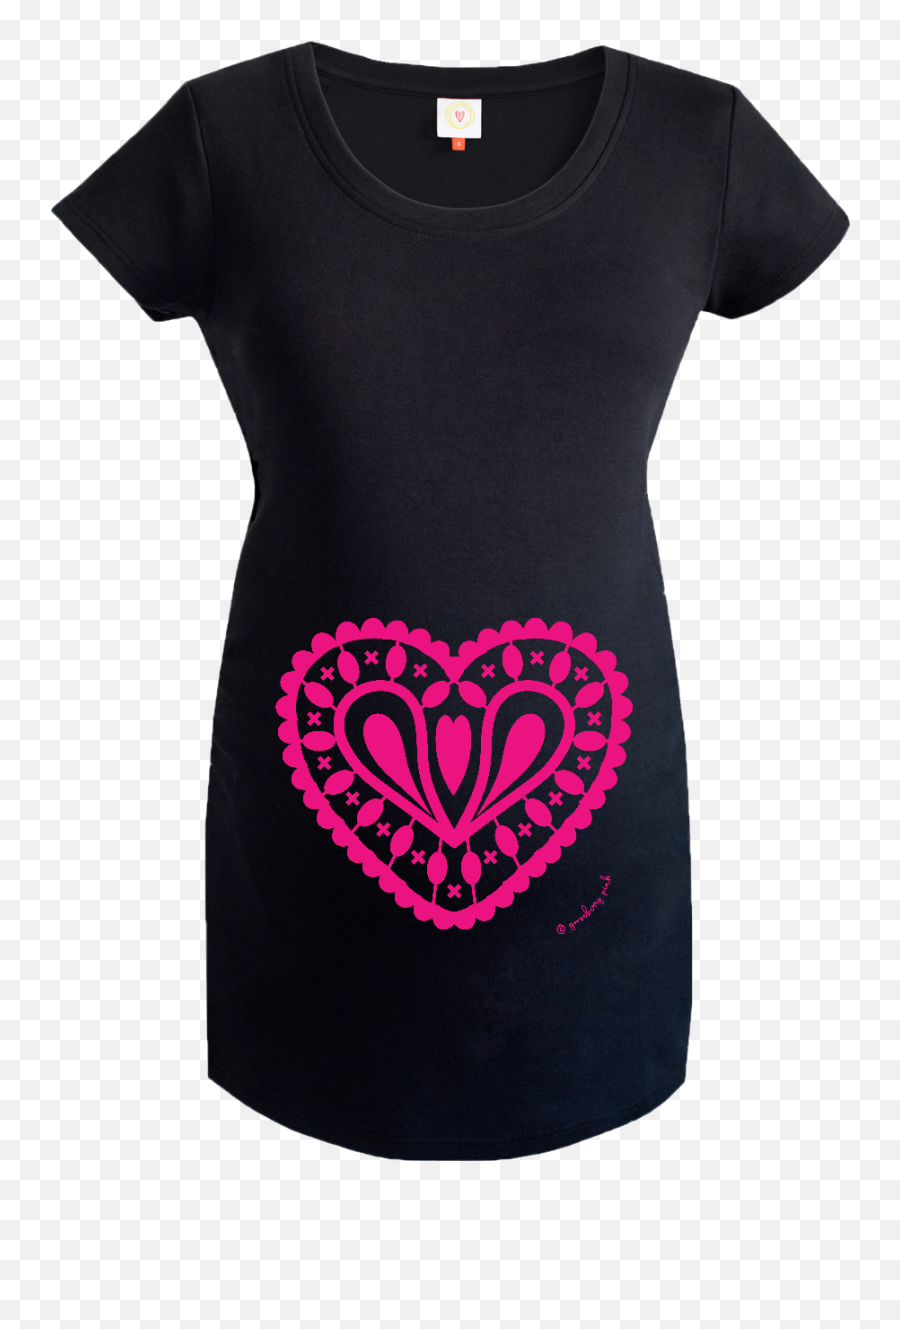 Download Hd Gooseberry Pink Hot Heart Maternity Top In Png Transparent Background